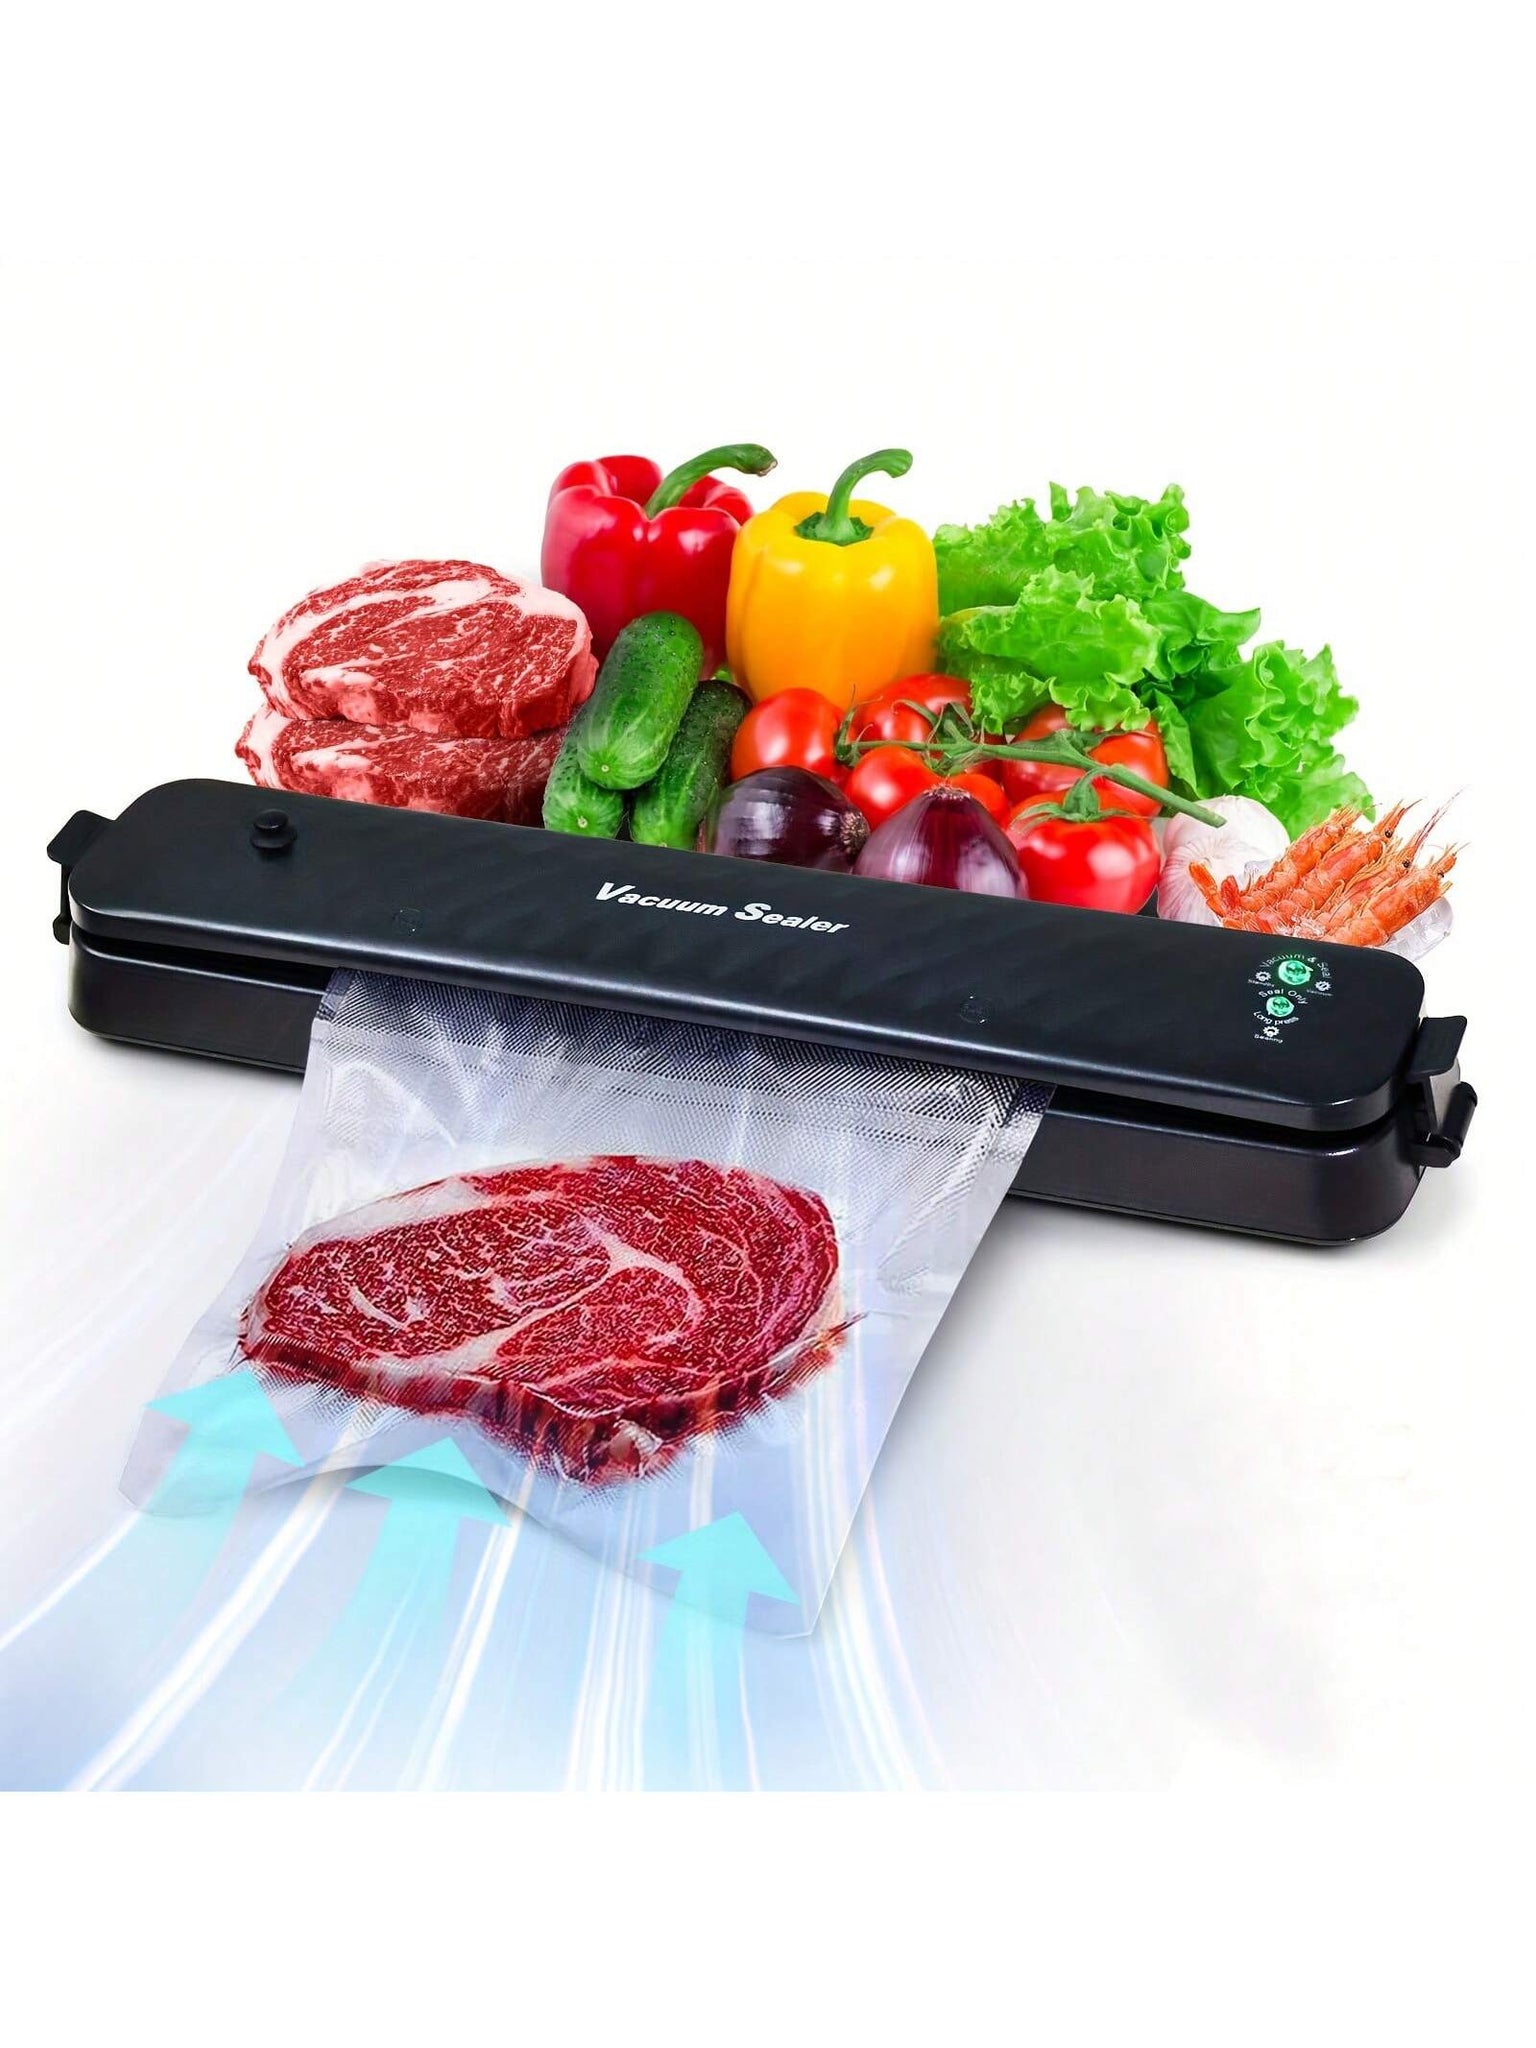 Never Waste Food Again - Automatic Vacuum Food Sealer Vacuum Sealer Machine Air Sealing Machine for Food Preservation with Two Modes with Sealer Bag-Black-1